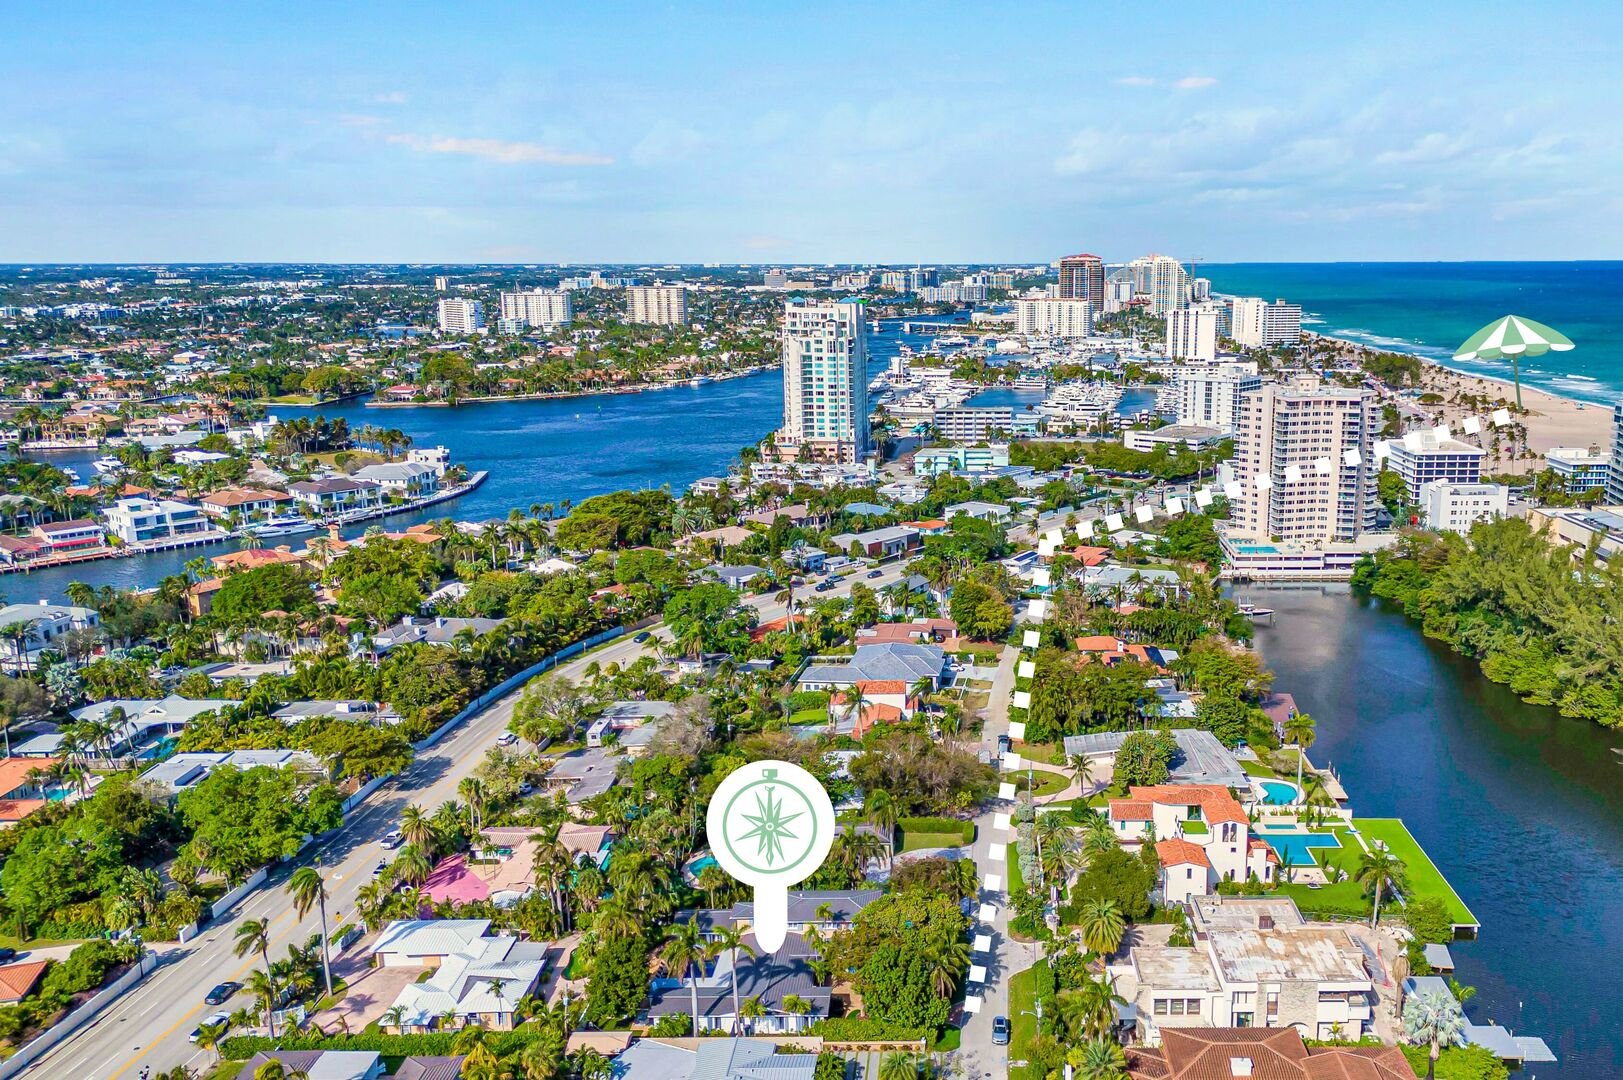 Harbor Key is located just a 10 minute walk to the Fort Lauderdale Beach.